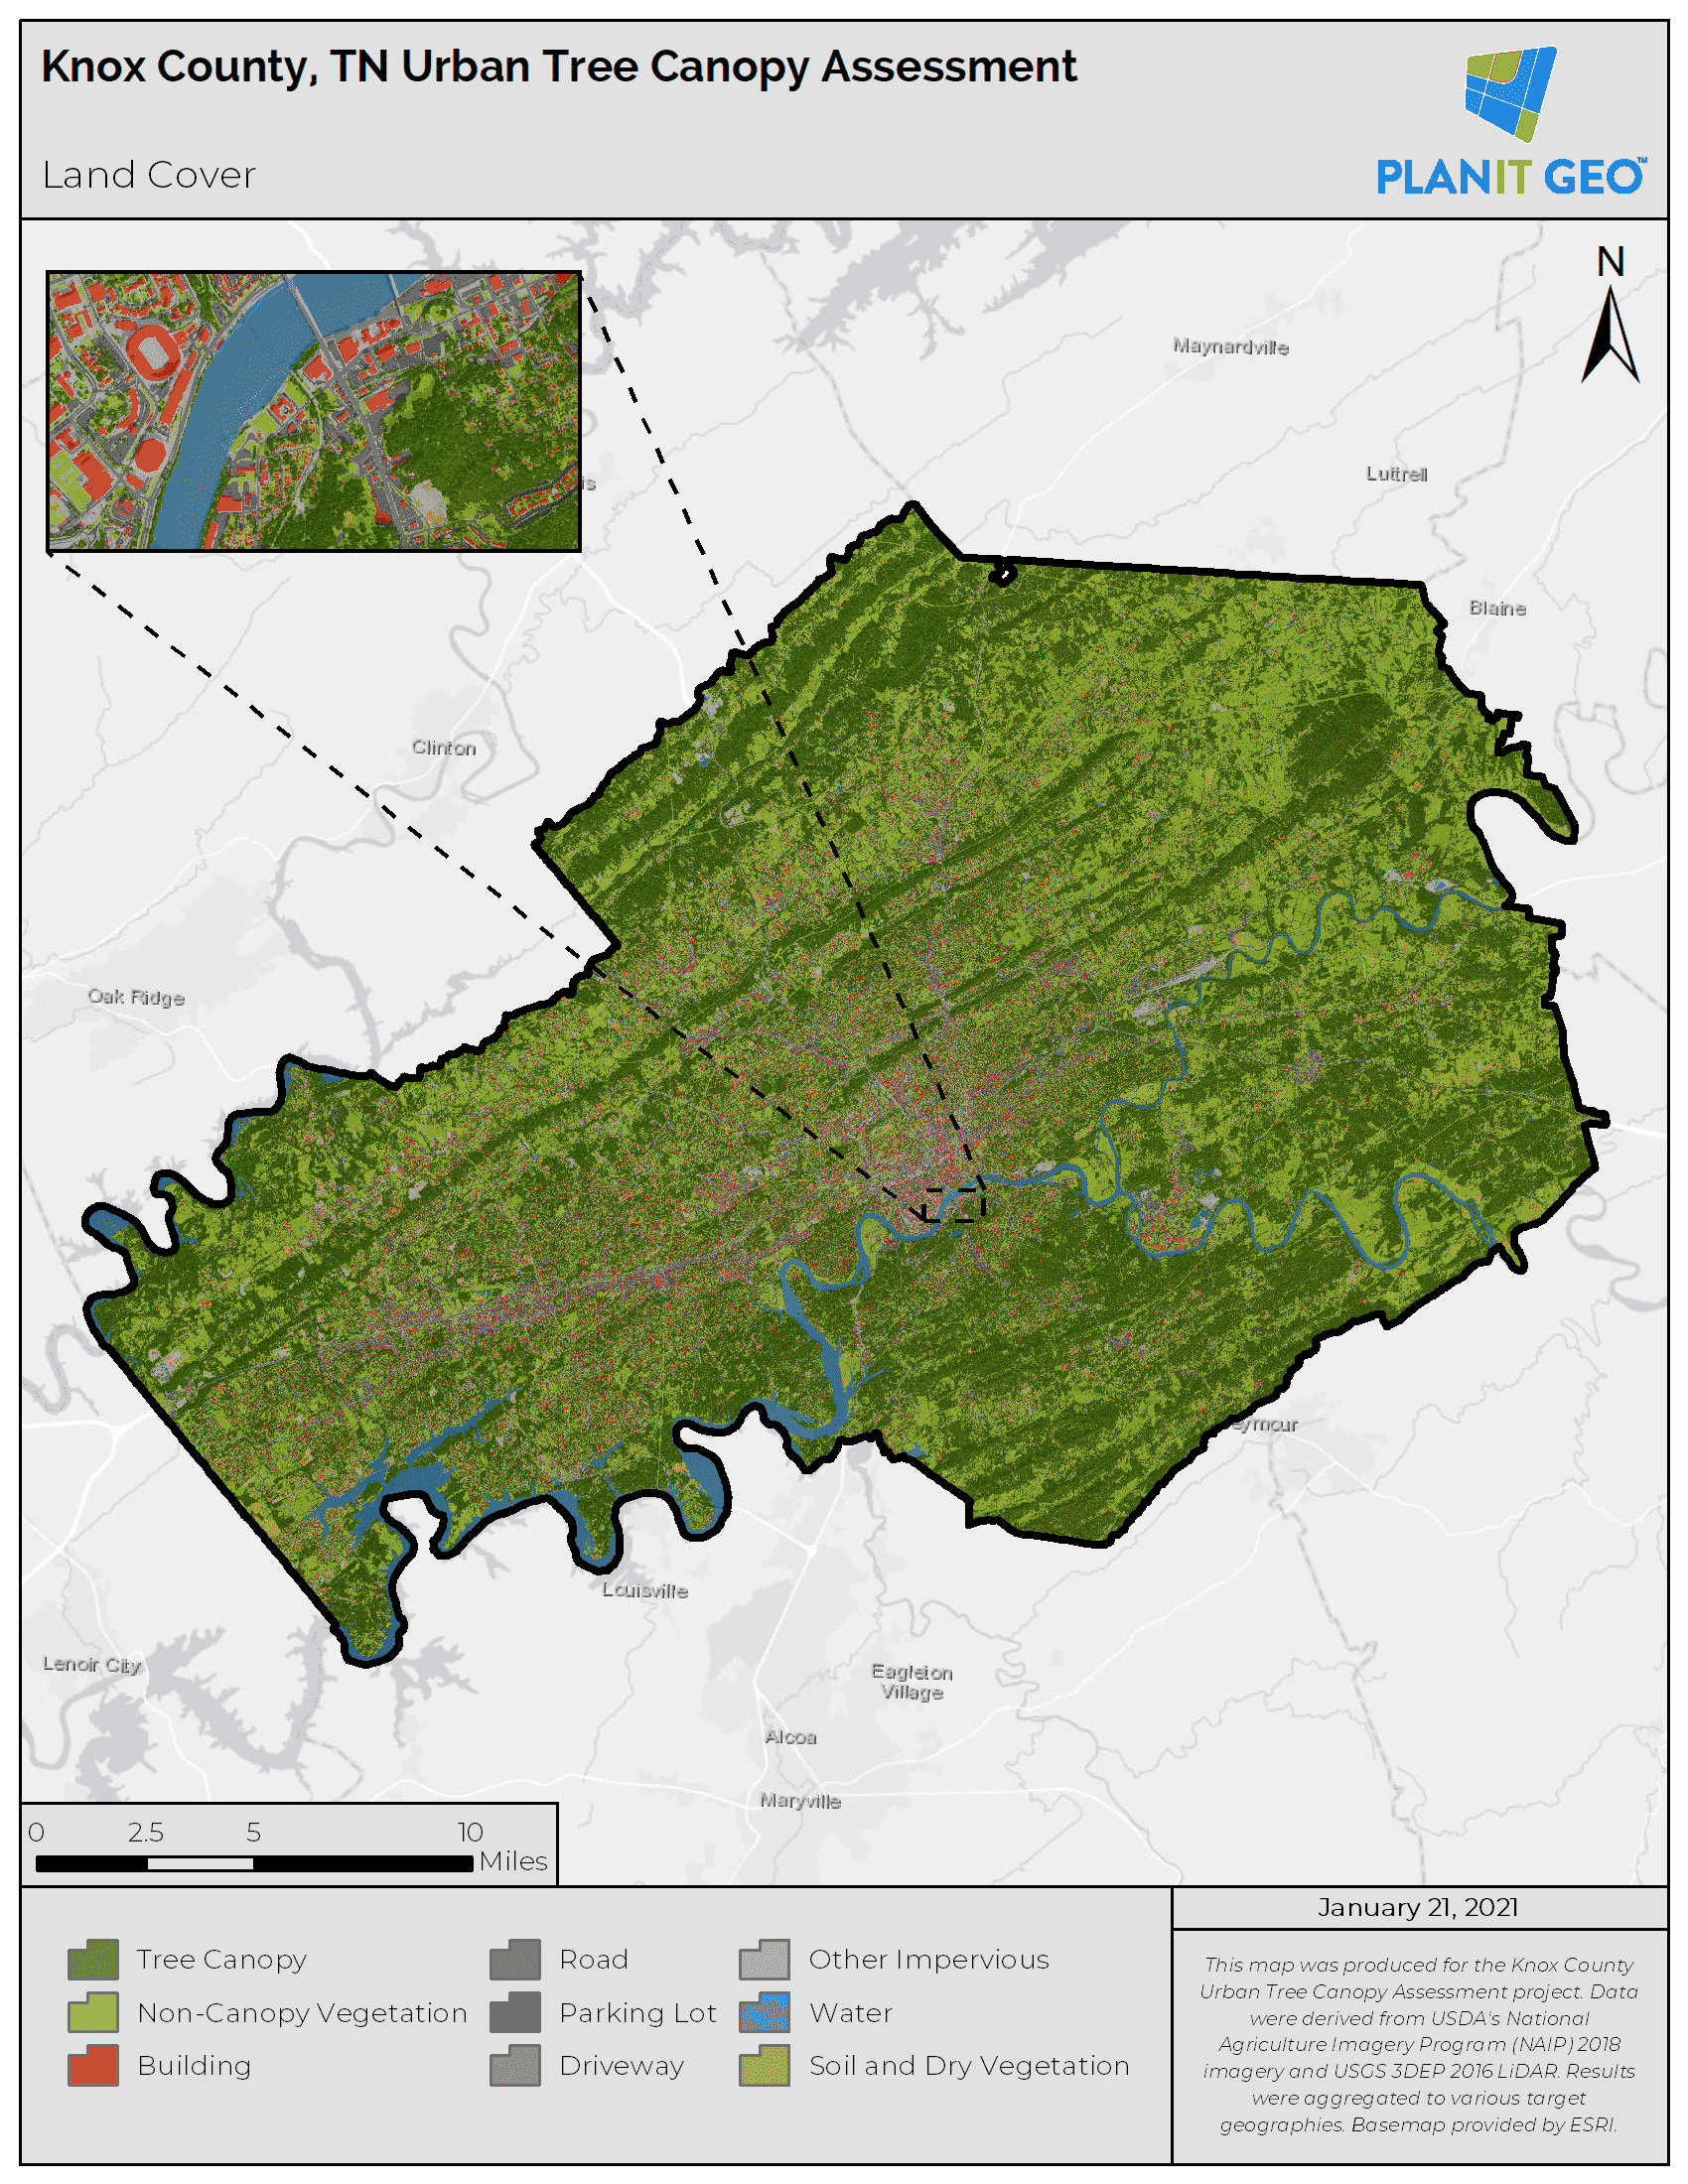 meet your urban tree canopy goals with treeplotter CANOPY software maps